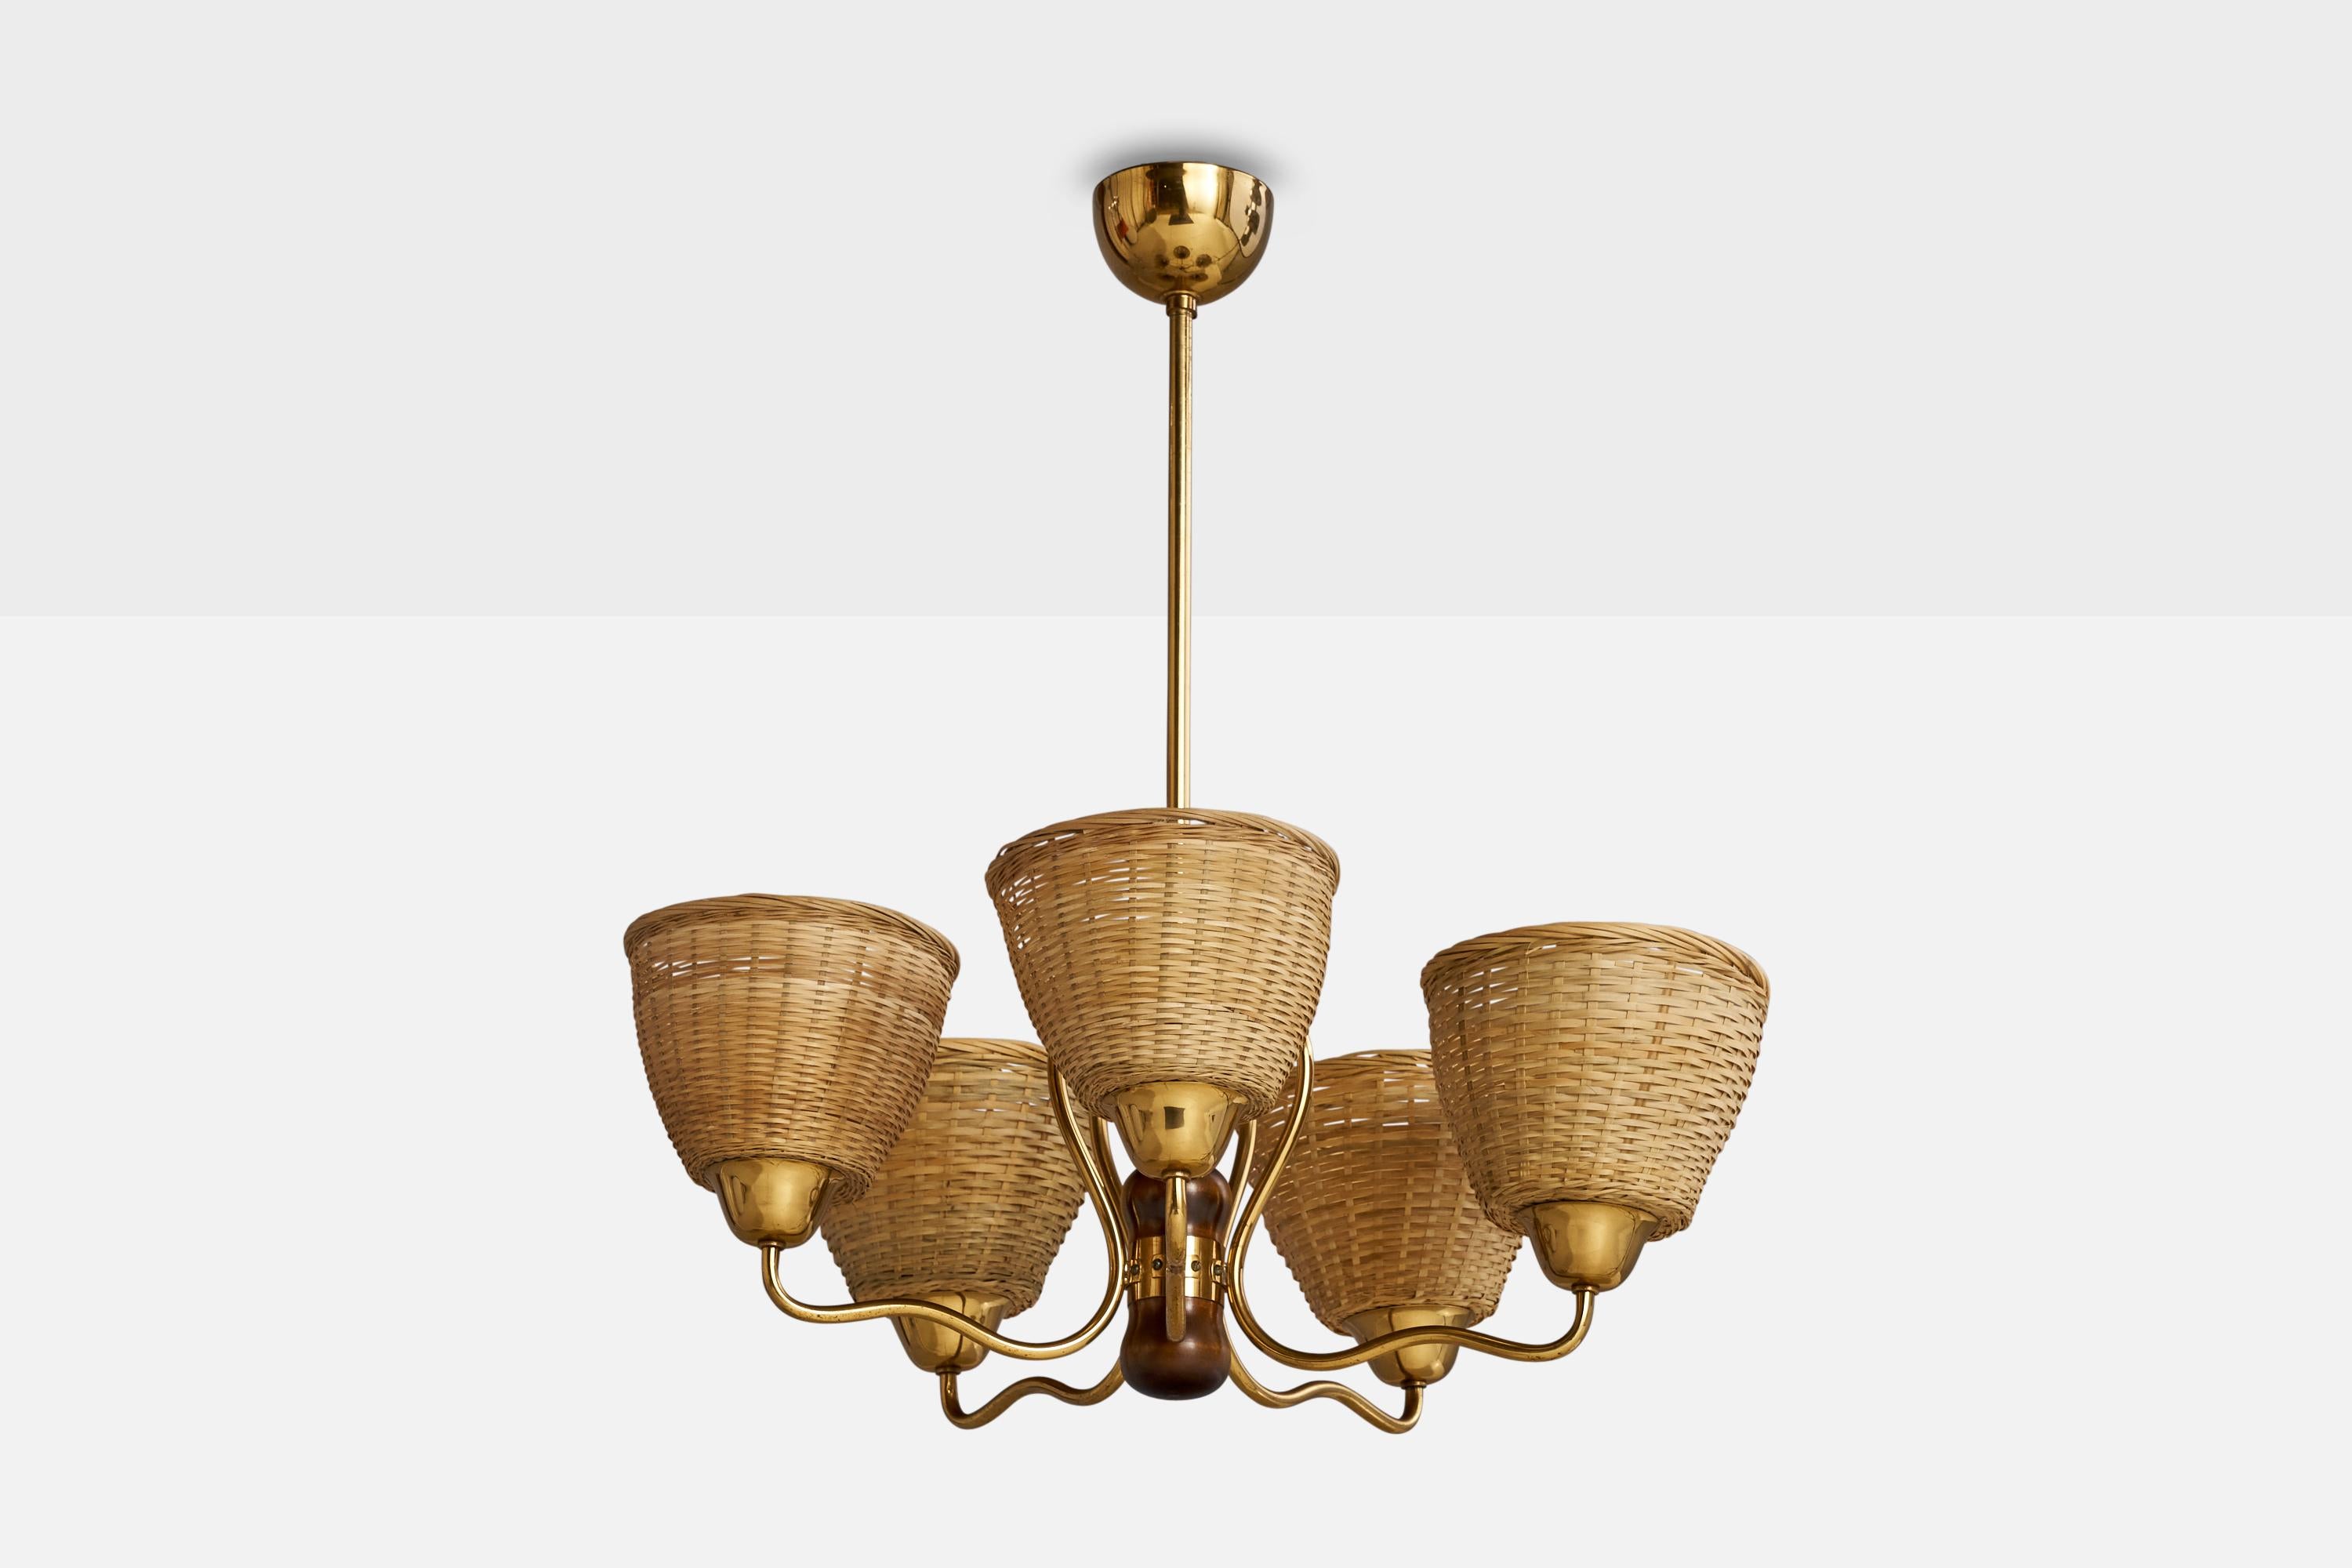 A brass, wood and rattan chandelier designed and produced in Sweden, 1940s.

Dimensions of canopy (inches): 2.5” H x 3.75” Diameter
Socket takes standard E-26 bulbs. 5 sockets.There is no maximum wattage stated on the fixture. All lighting will be